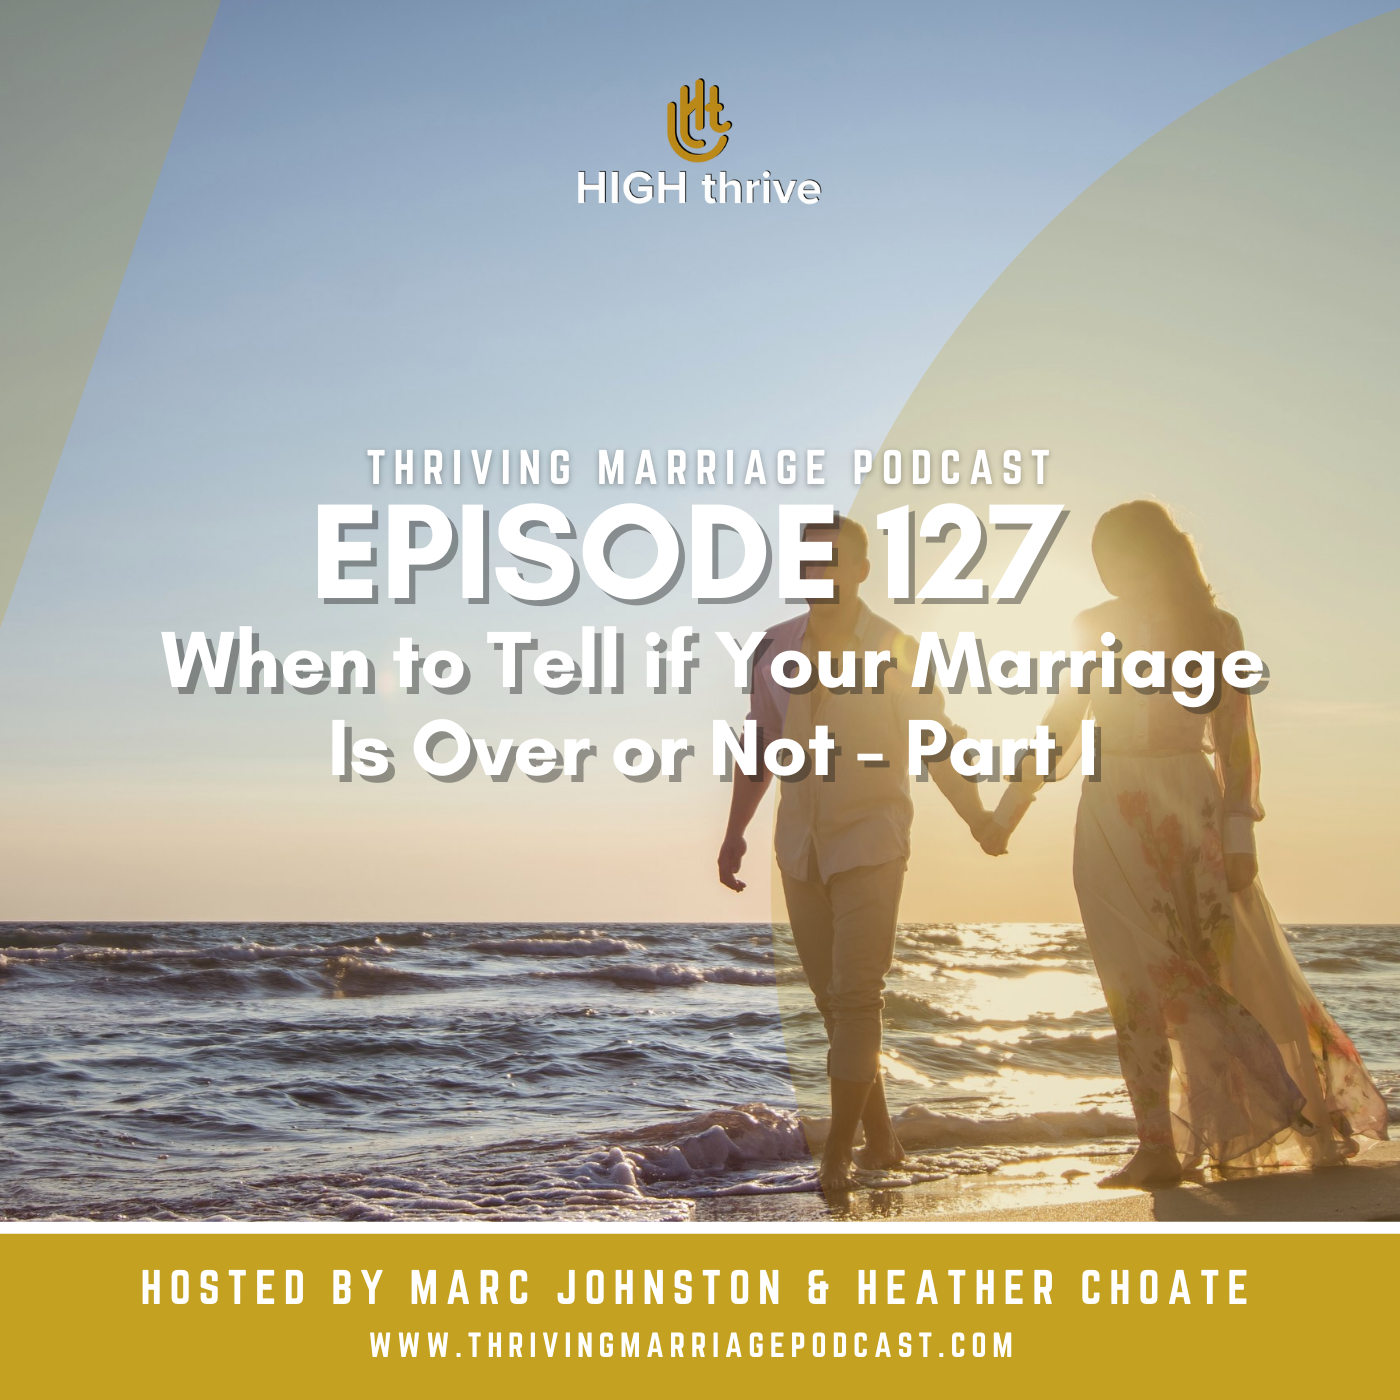 Episode 127: When to Tell if Your Marriage Is Over or Not - Part I